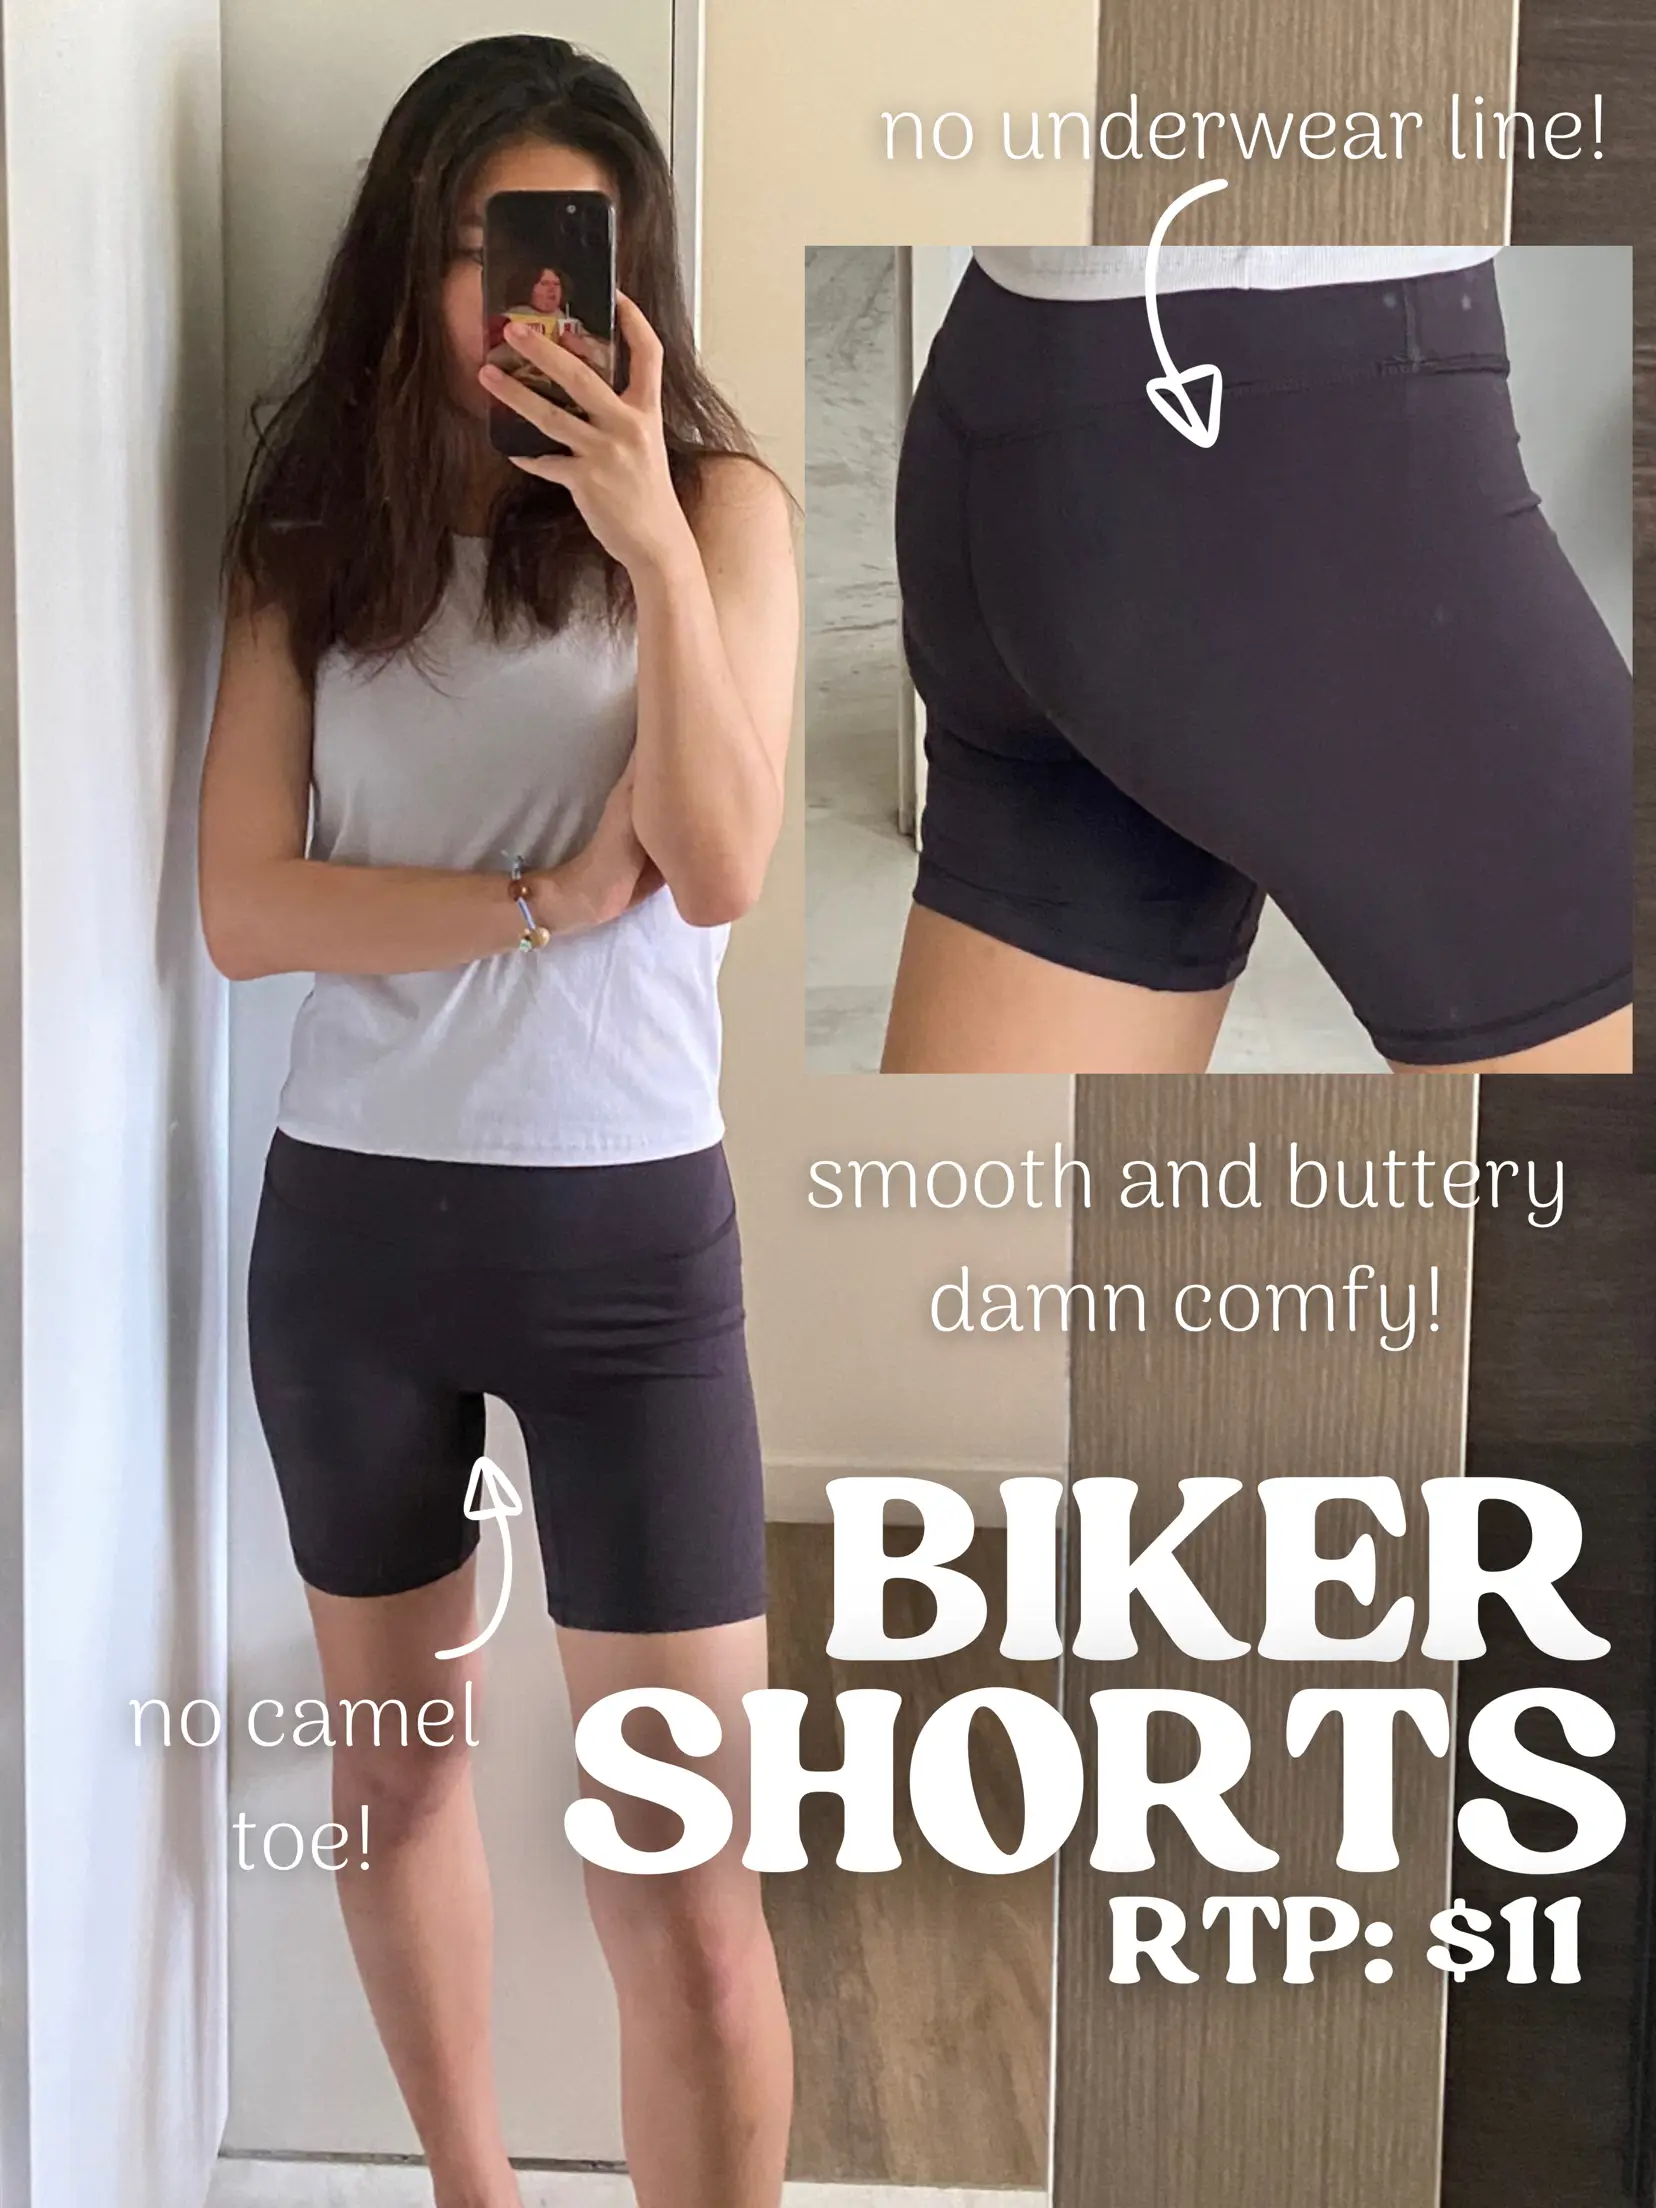 Kydra Kyro 7” Pocket Shorts in Pale Lilac, Women's Fashion, Activewear on  Carousell